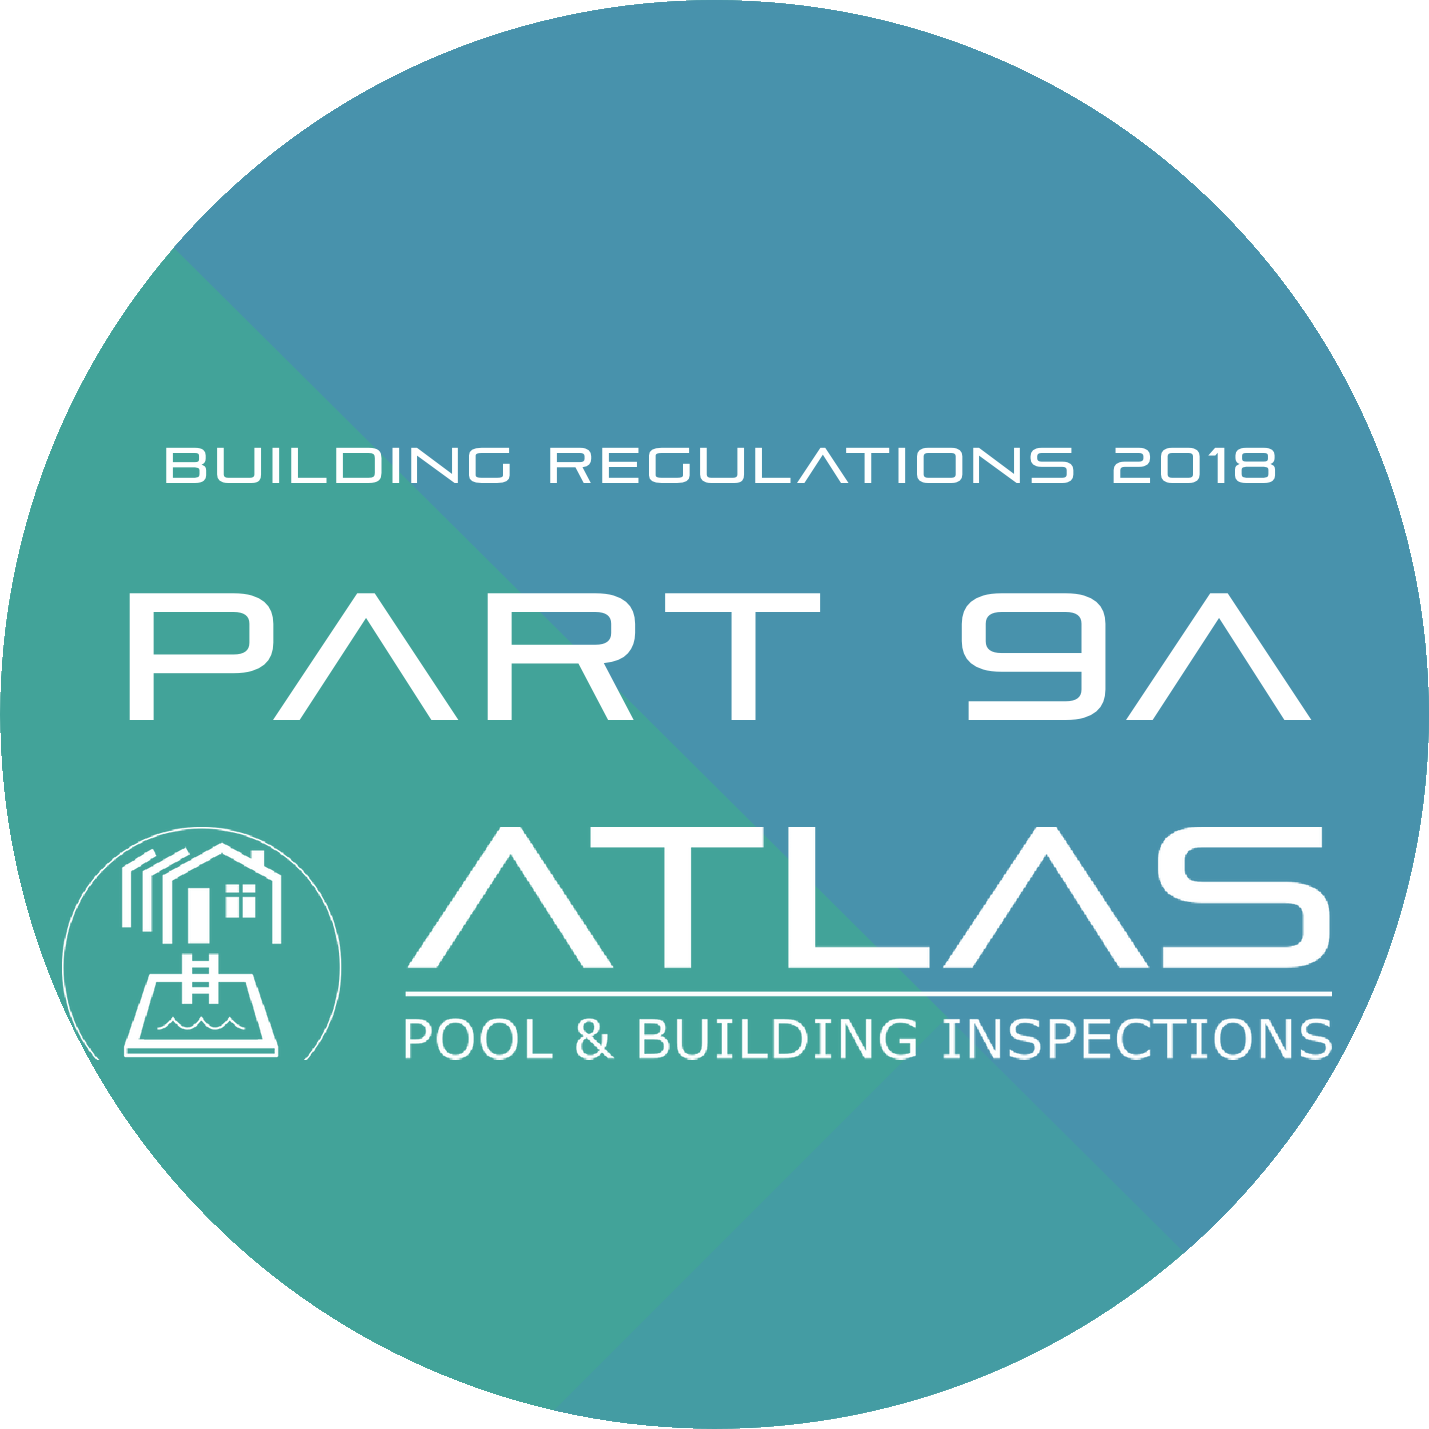 Pool Safety Report for Part 9A of Building Regulations 2018